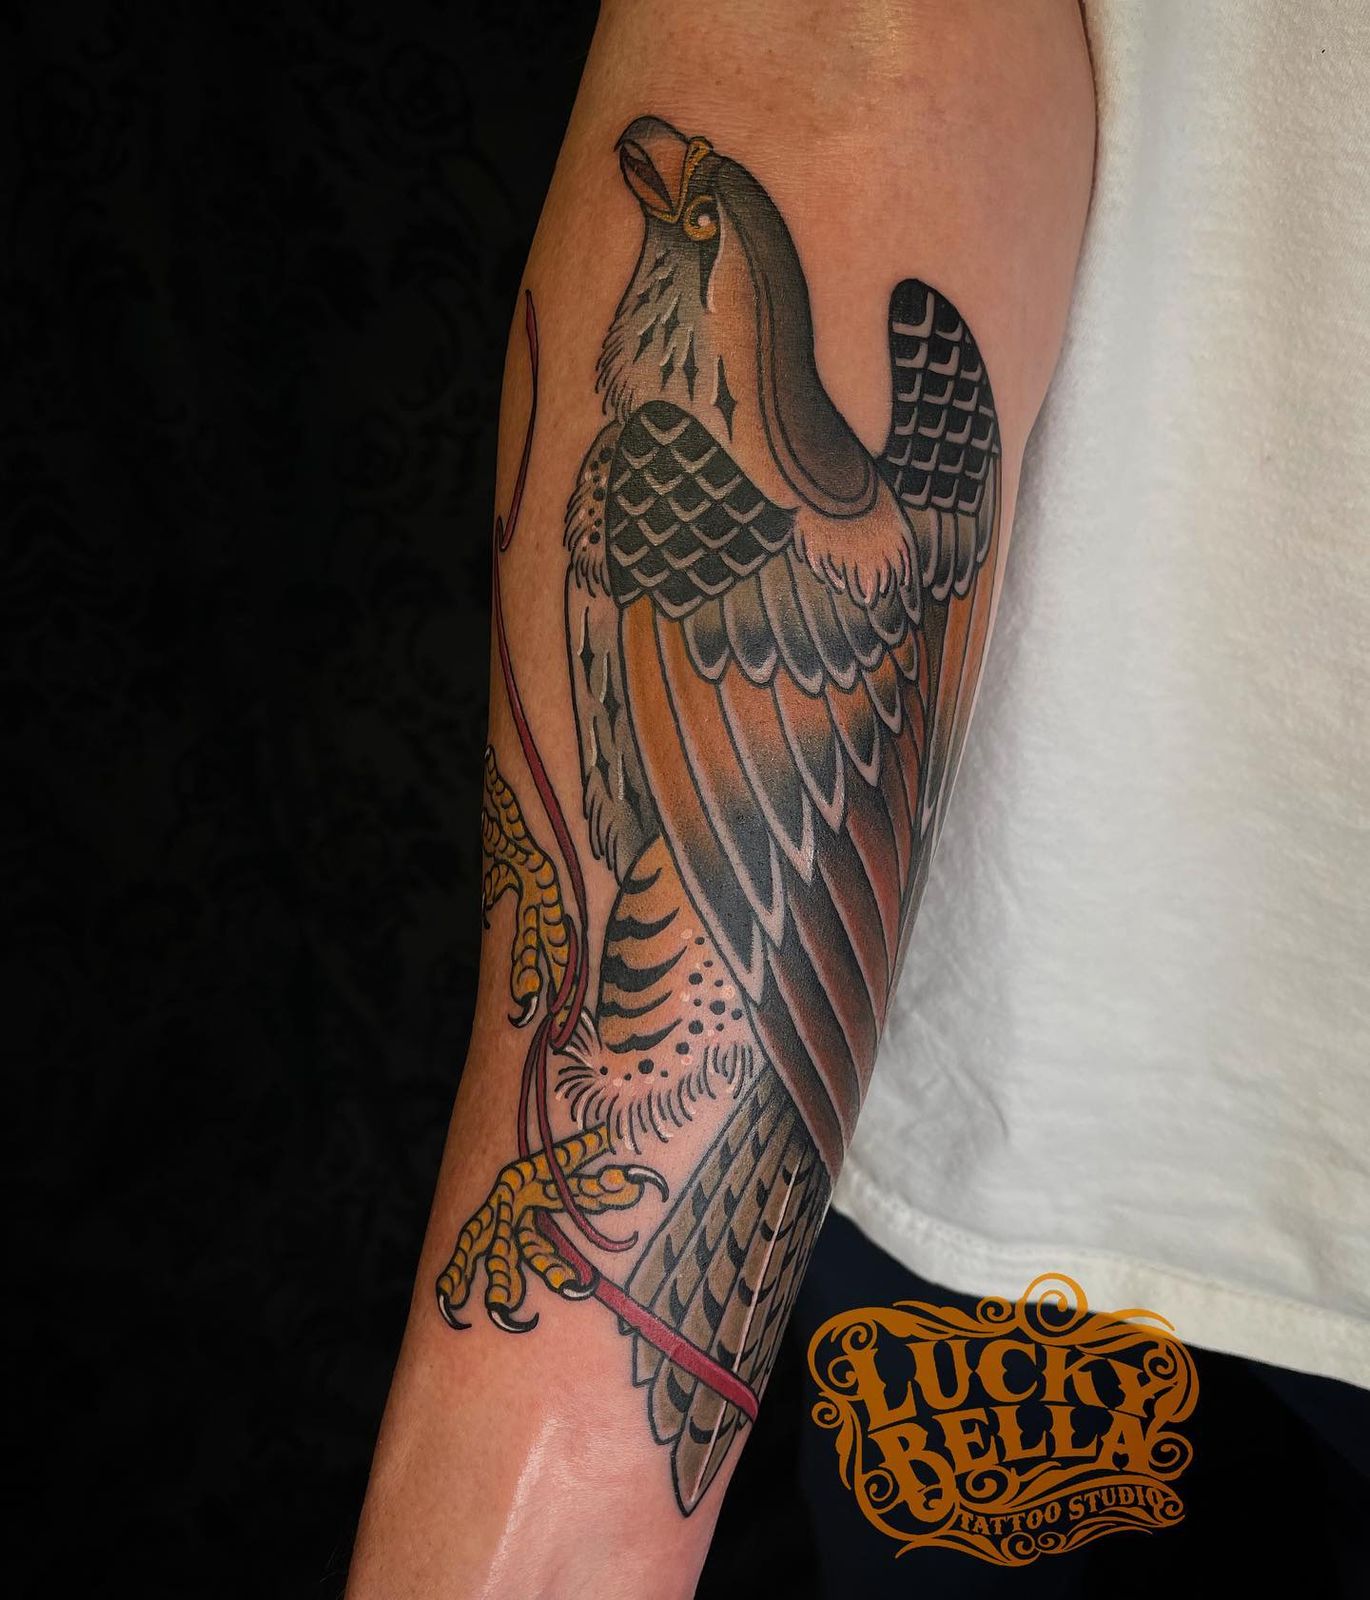 Hawk Tattoo Meaning: The Deeper Meanings Behind Popular Tattoo Designs